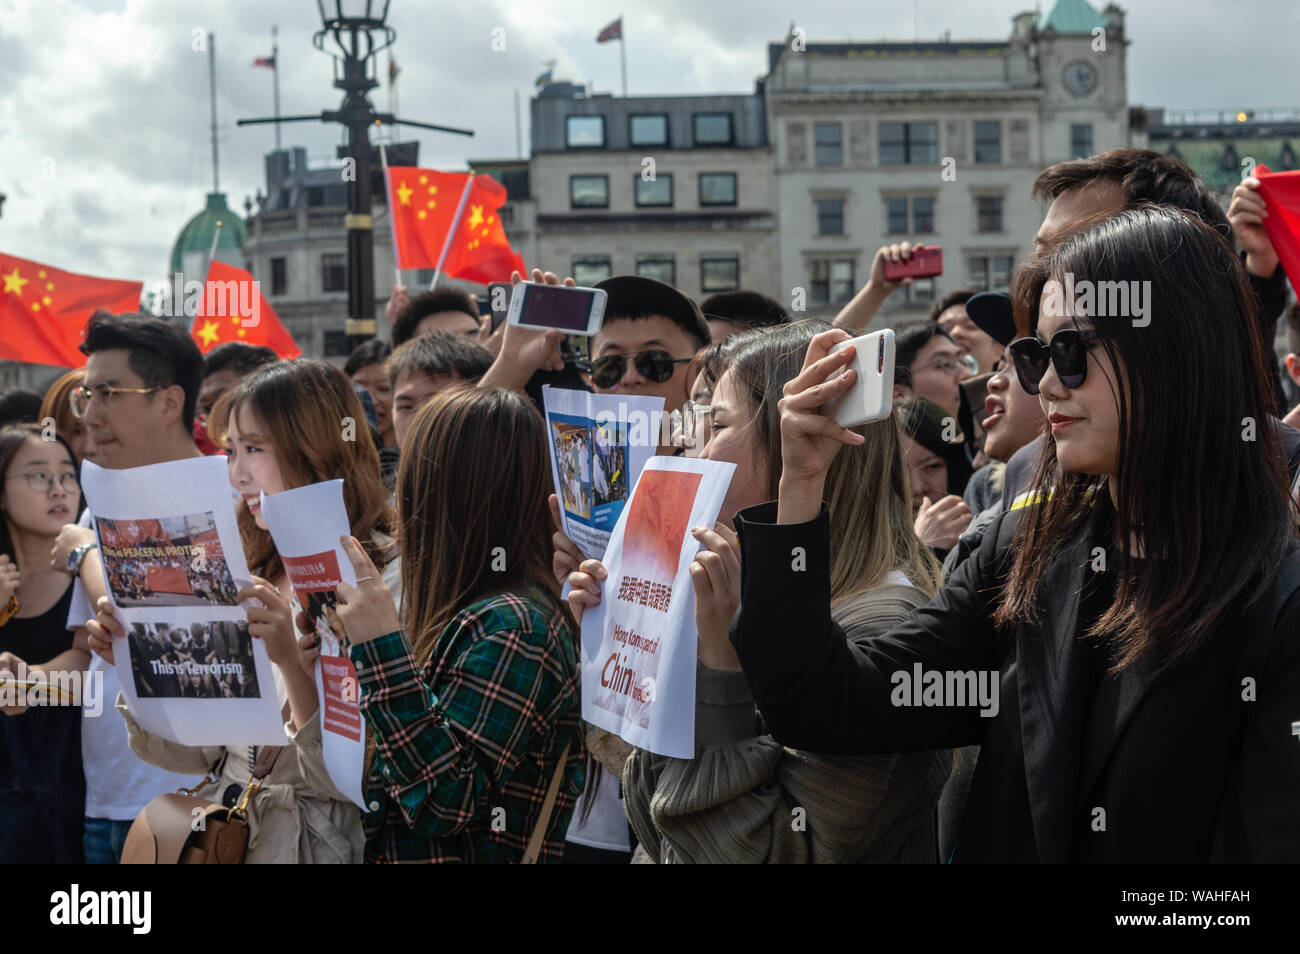 Opponents of the protesters at the UK Solidarity with Hong Kong rally holding posters. Stock Photo